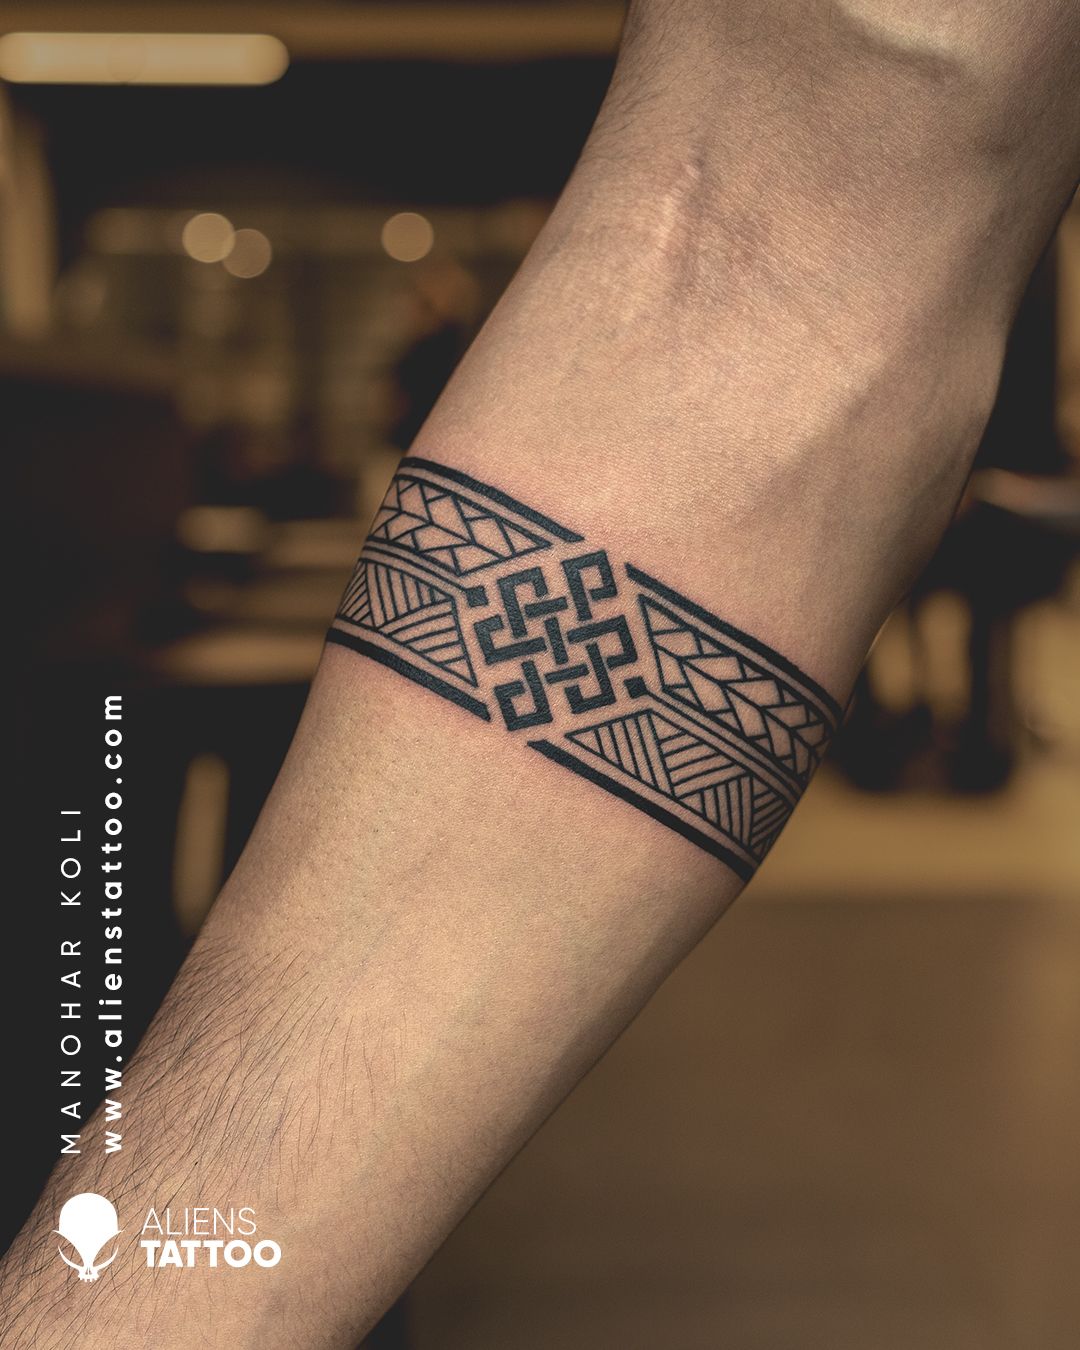 13 Best Armband Tattoo Design Ideas Meaning and Inspirations  Saved  Tattoo